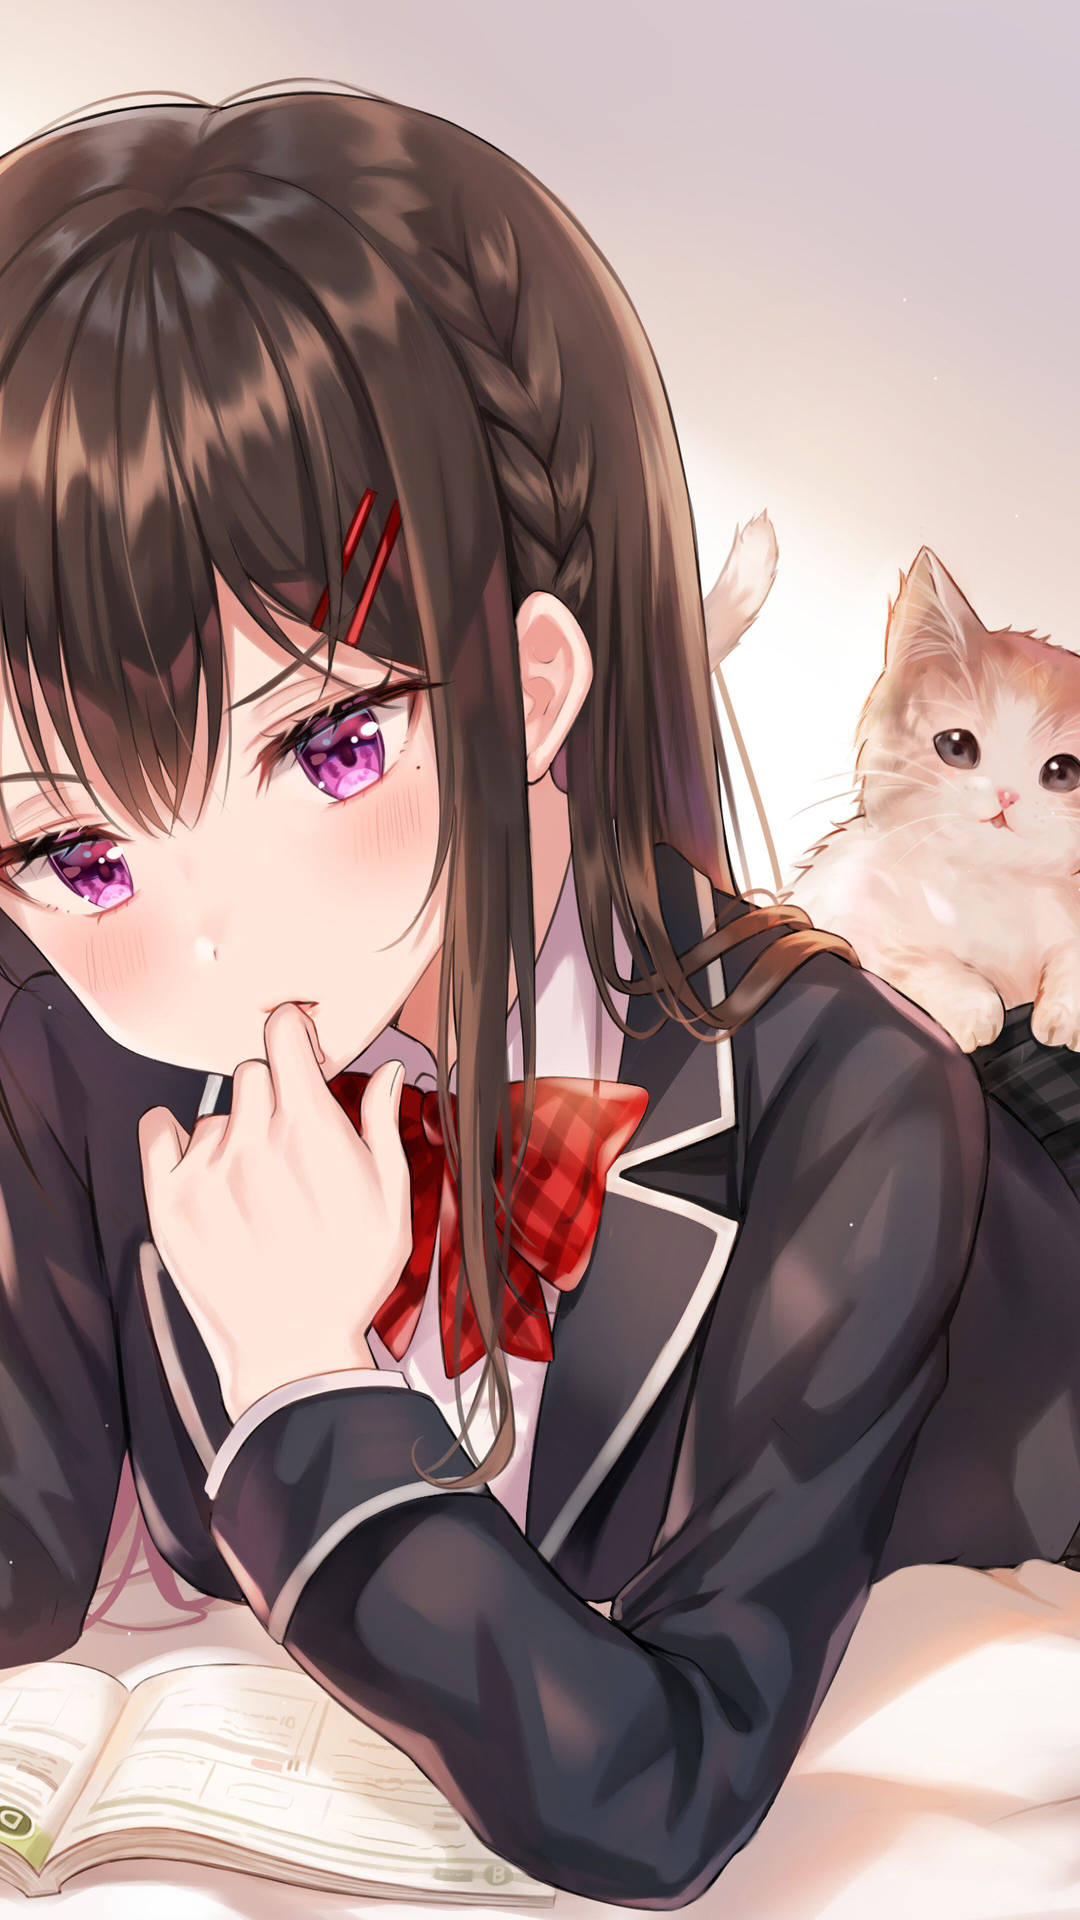 Hd Anime Phone Schoolgirl Laying Down With Cat Wallpaper